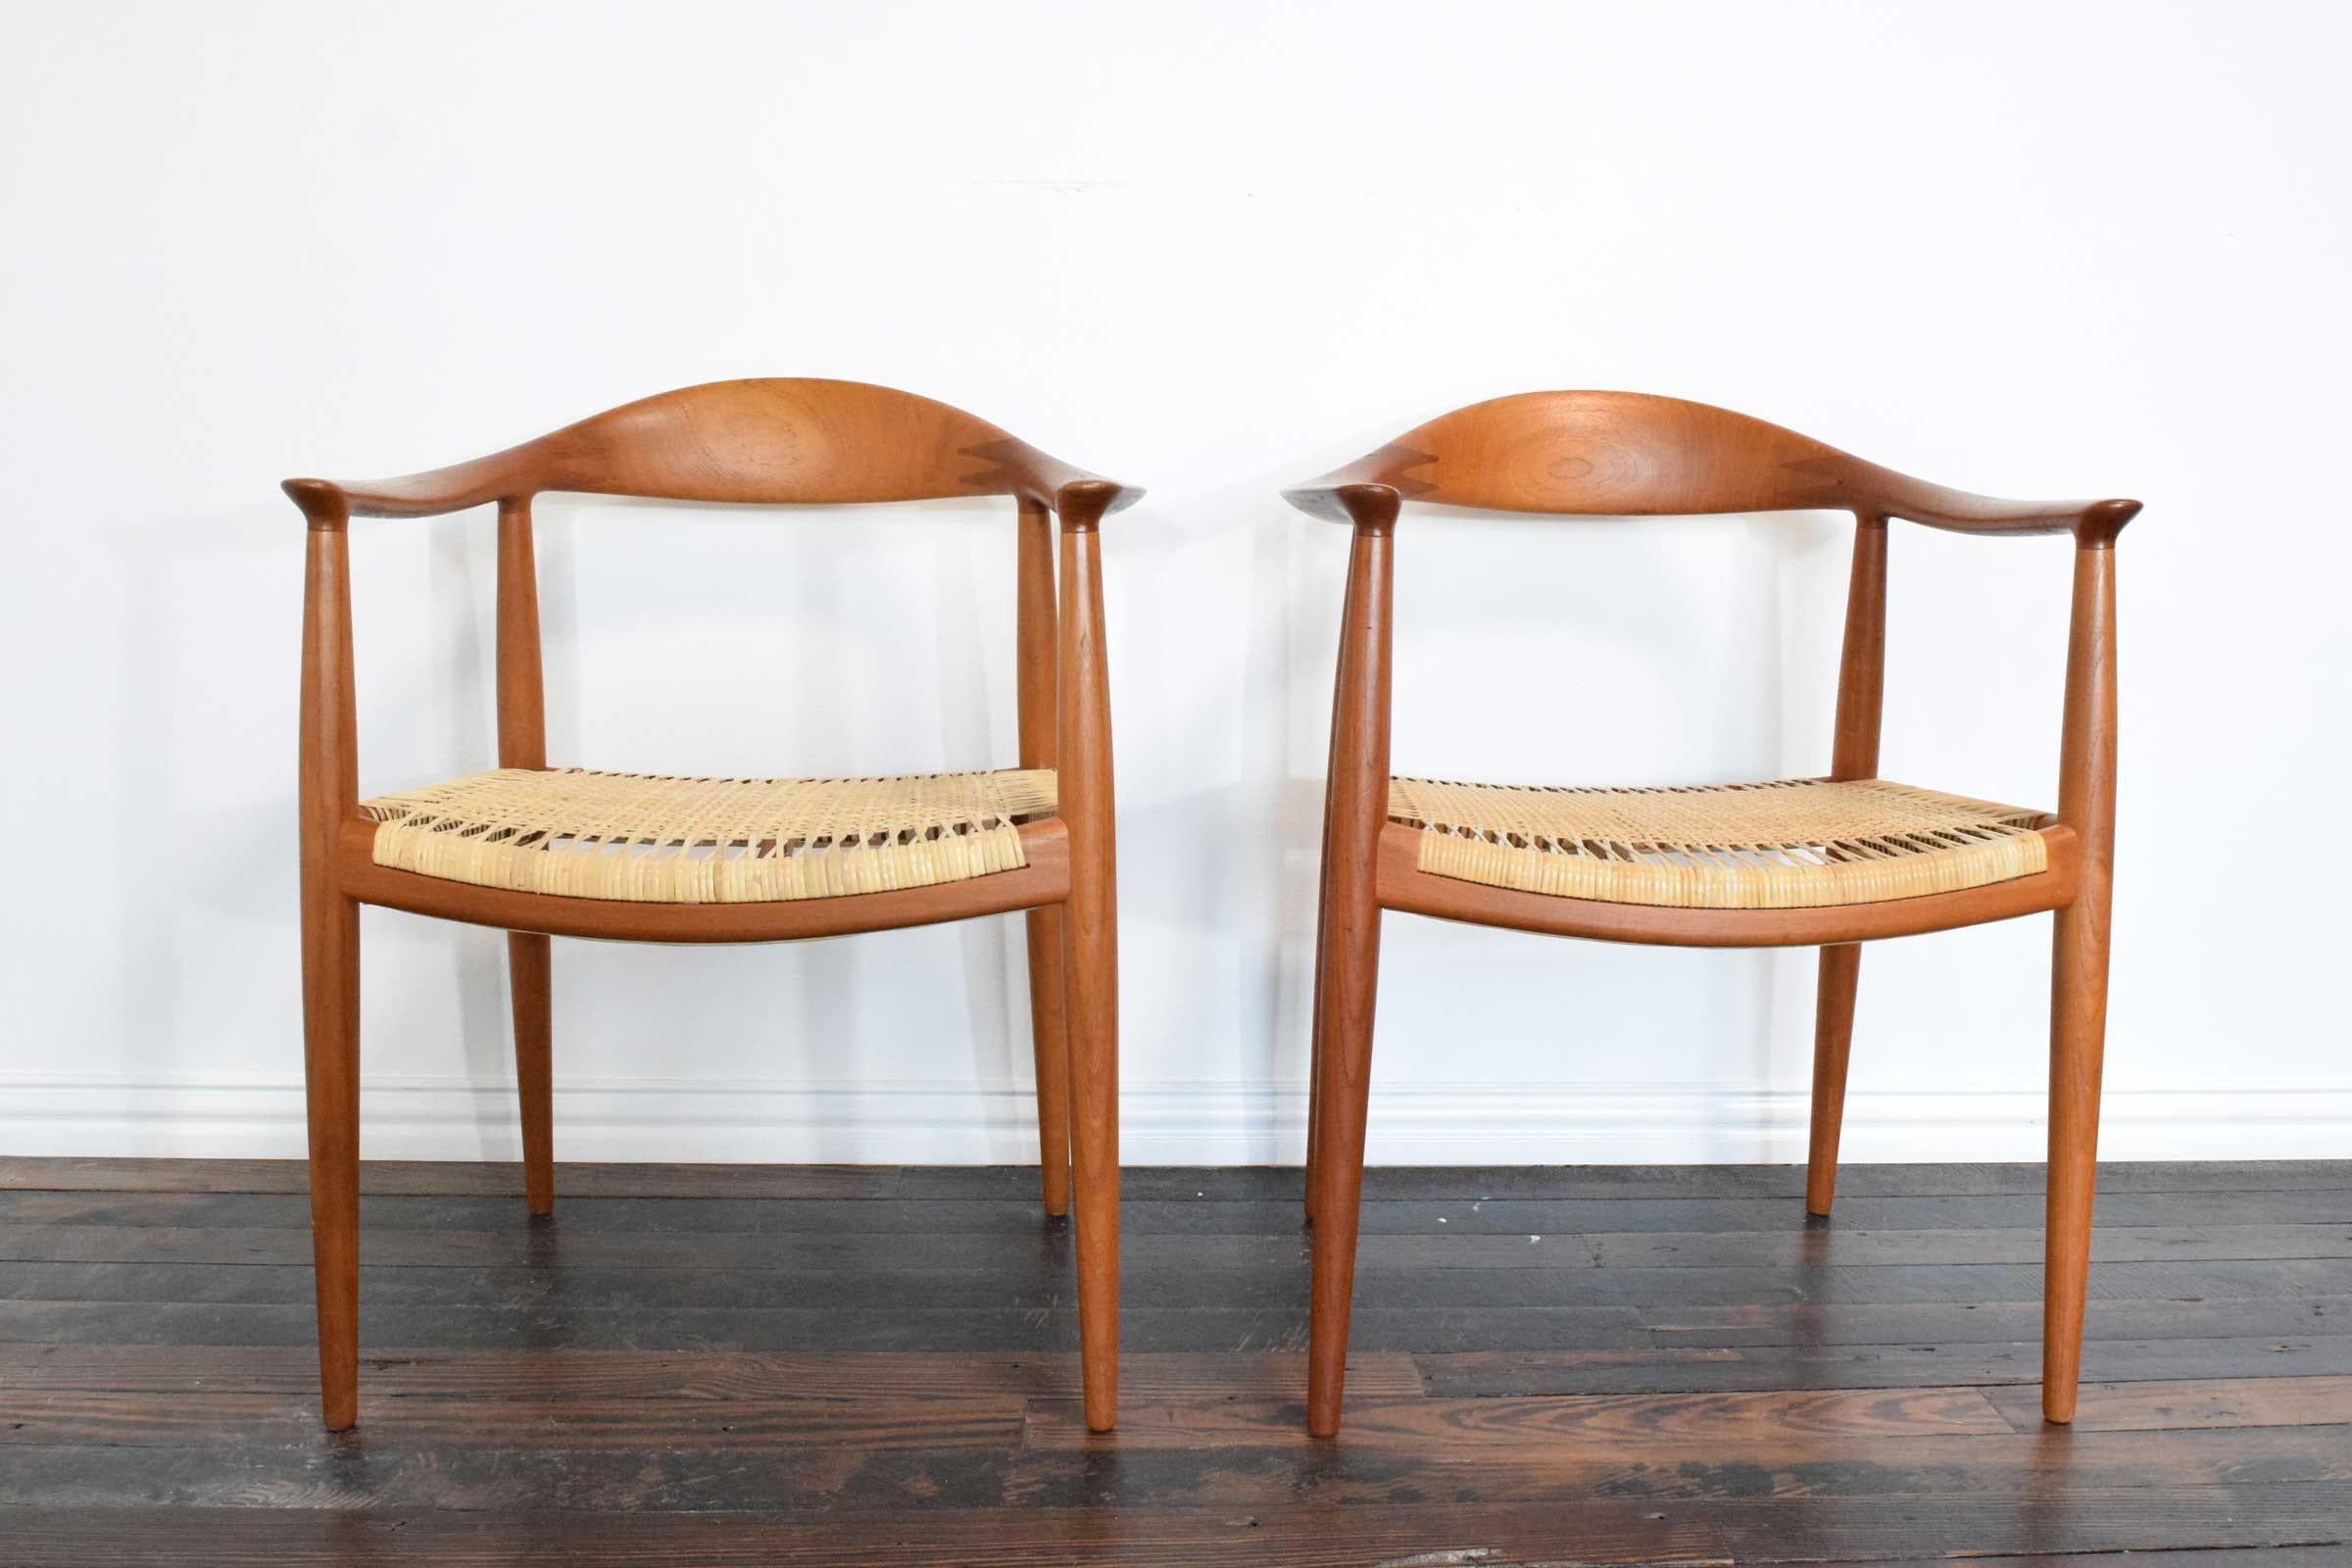 Beautiful pair of round chairs by Hans Wegner. Cane seats. One seat was replaced. Both show very well.